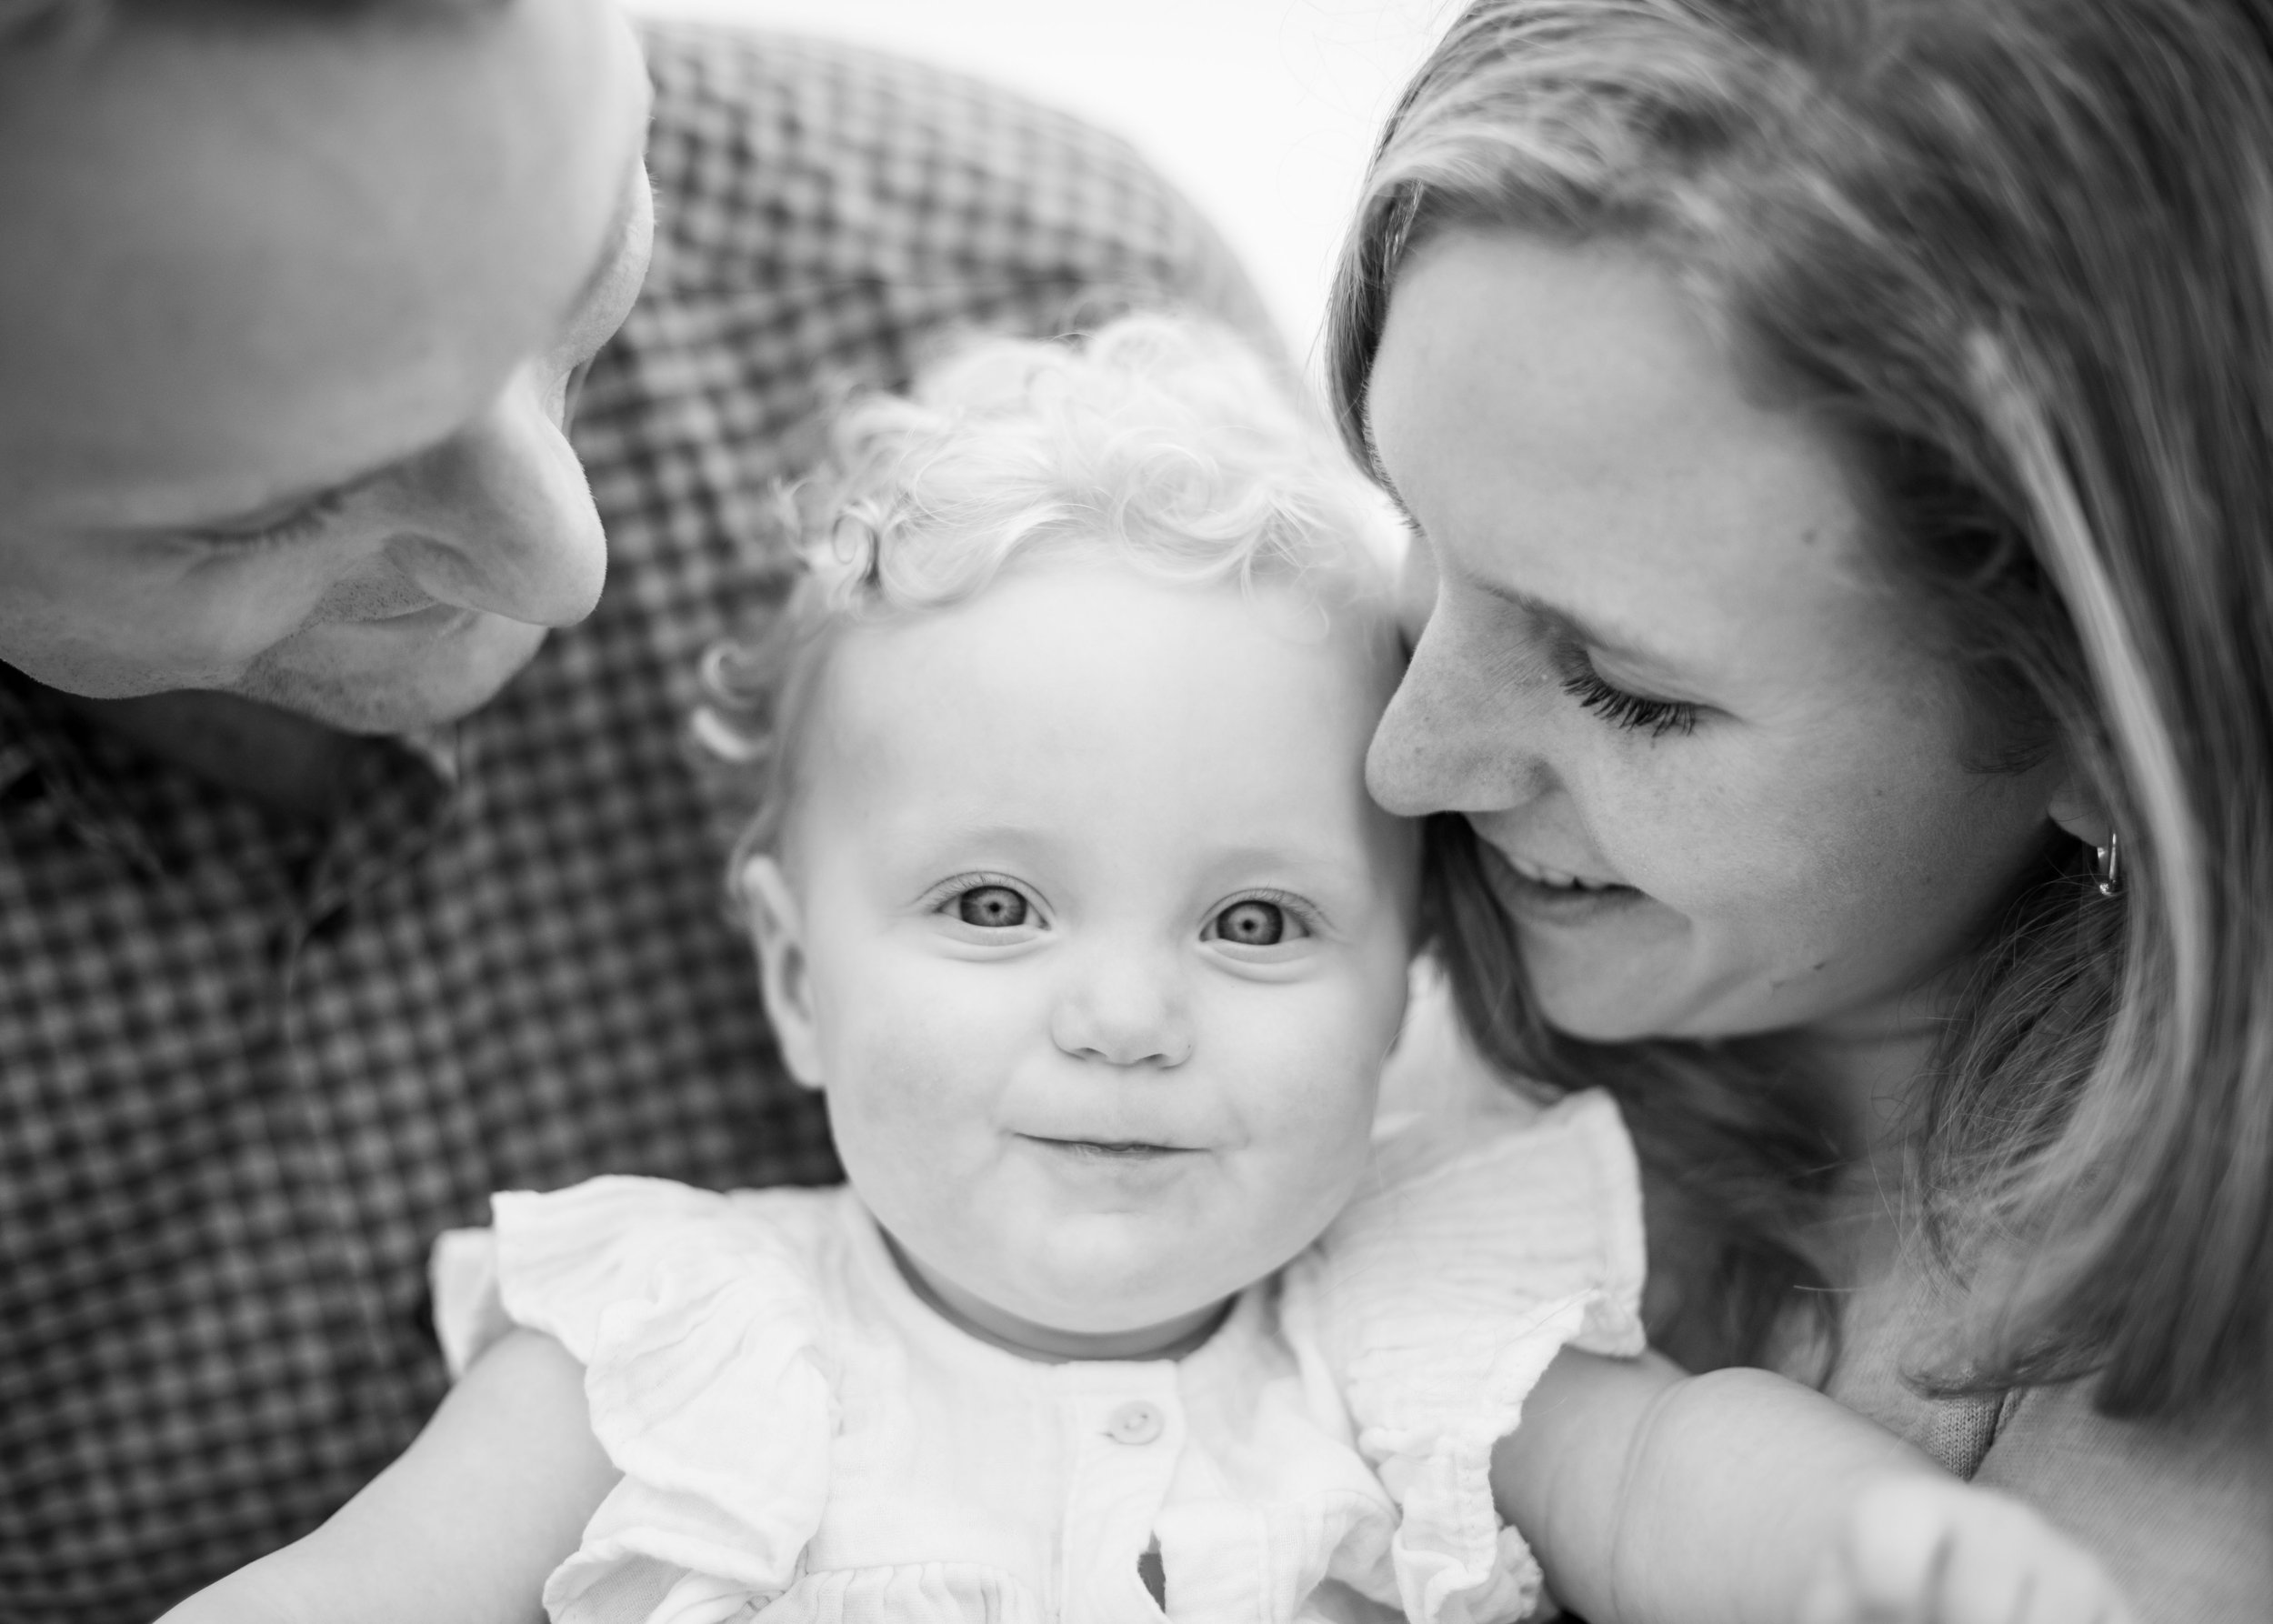 lindsay murphy photography | portland maine family photographer | black and white kettle cove cape elizabeth baby and parents.jpg